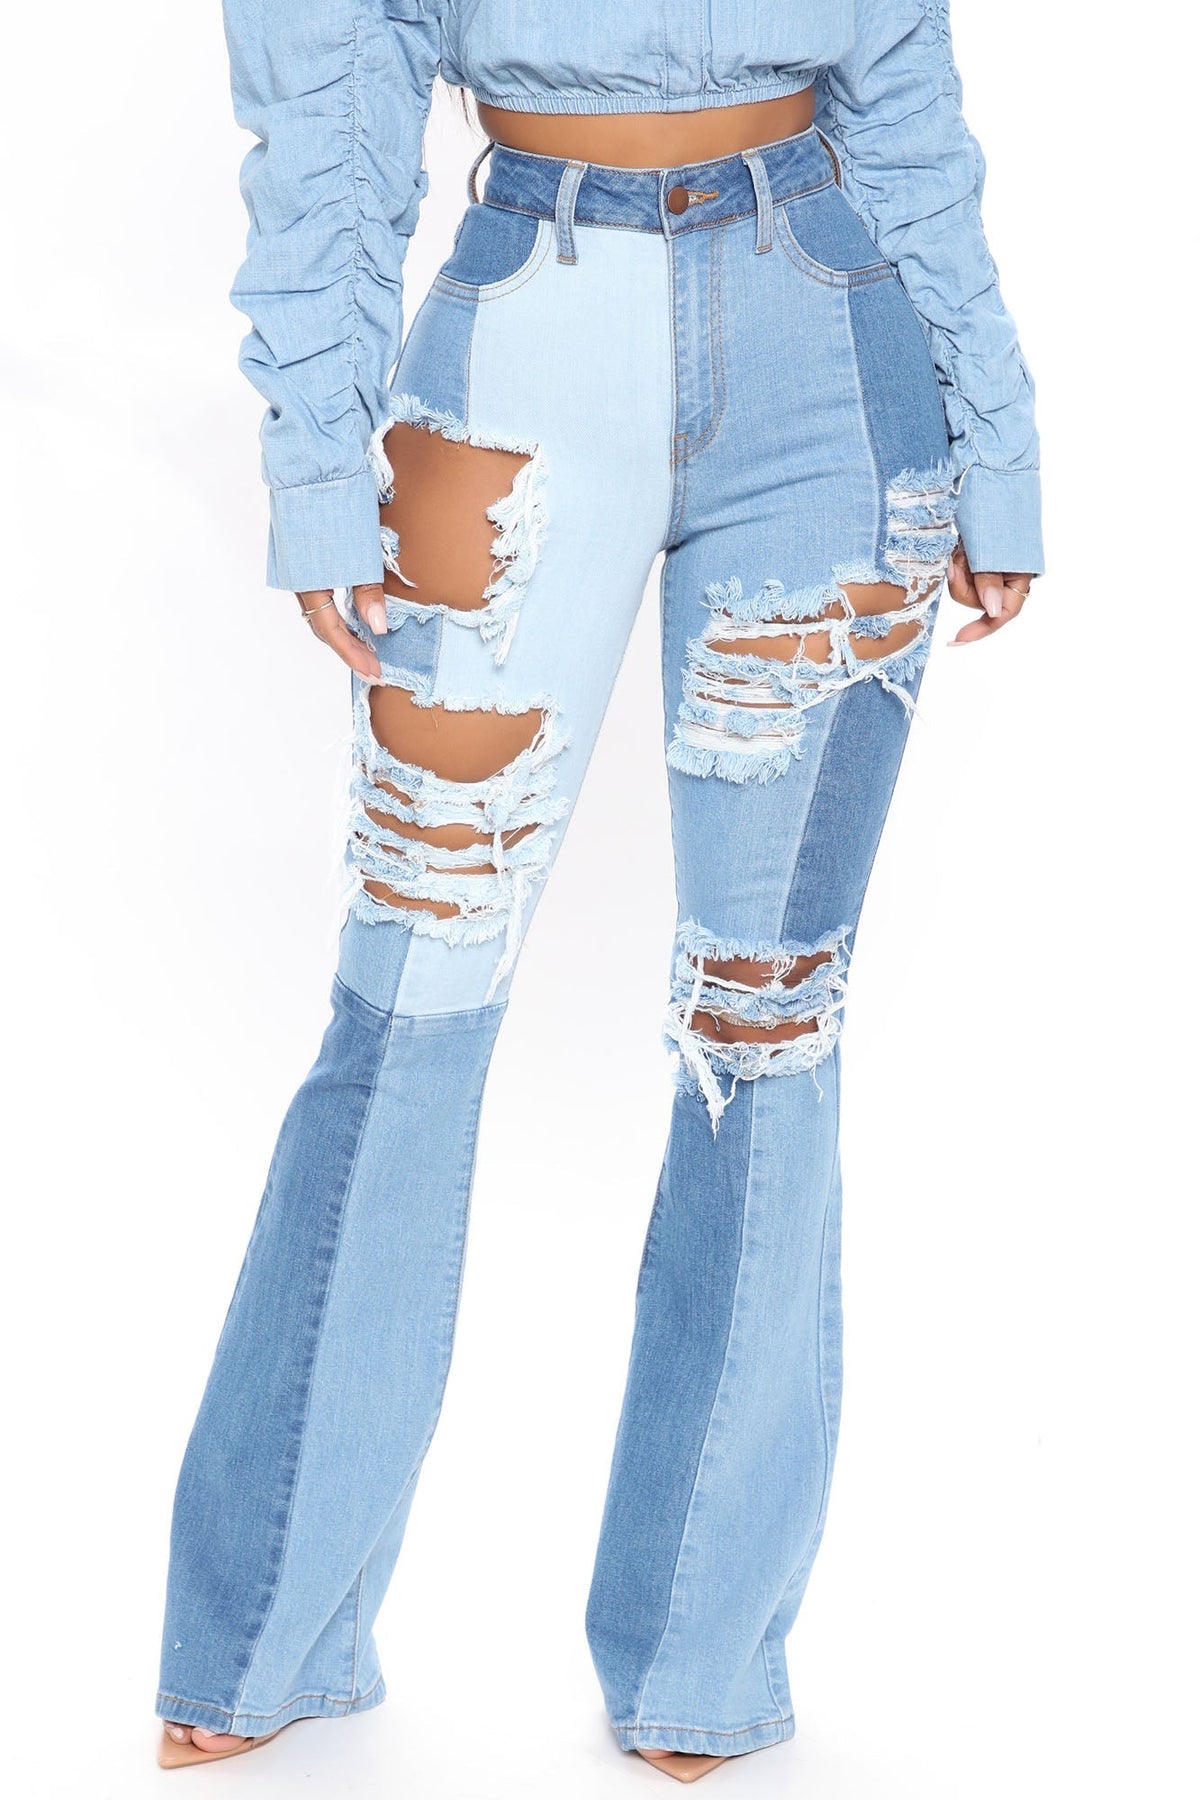 Two Timing High Rise Distressed Flare Jeans - Medium Blue Wash